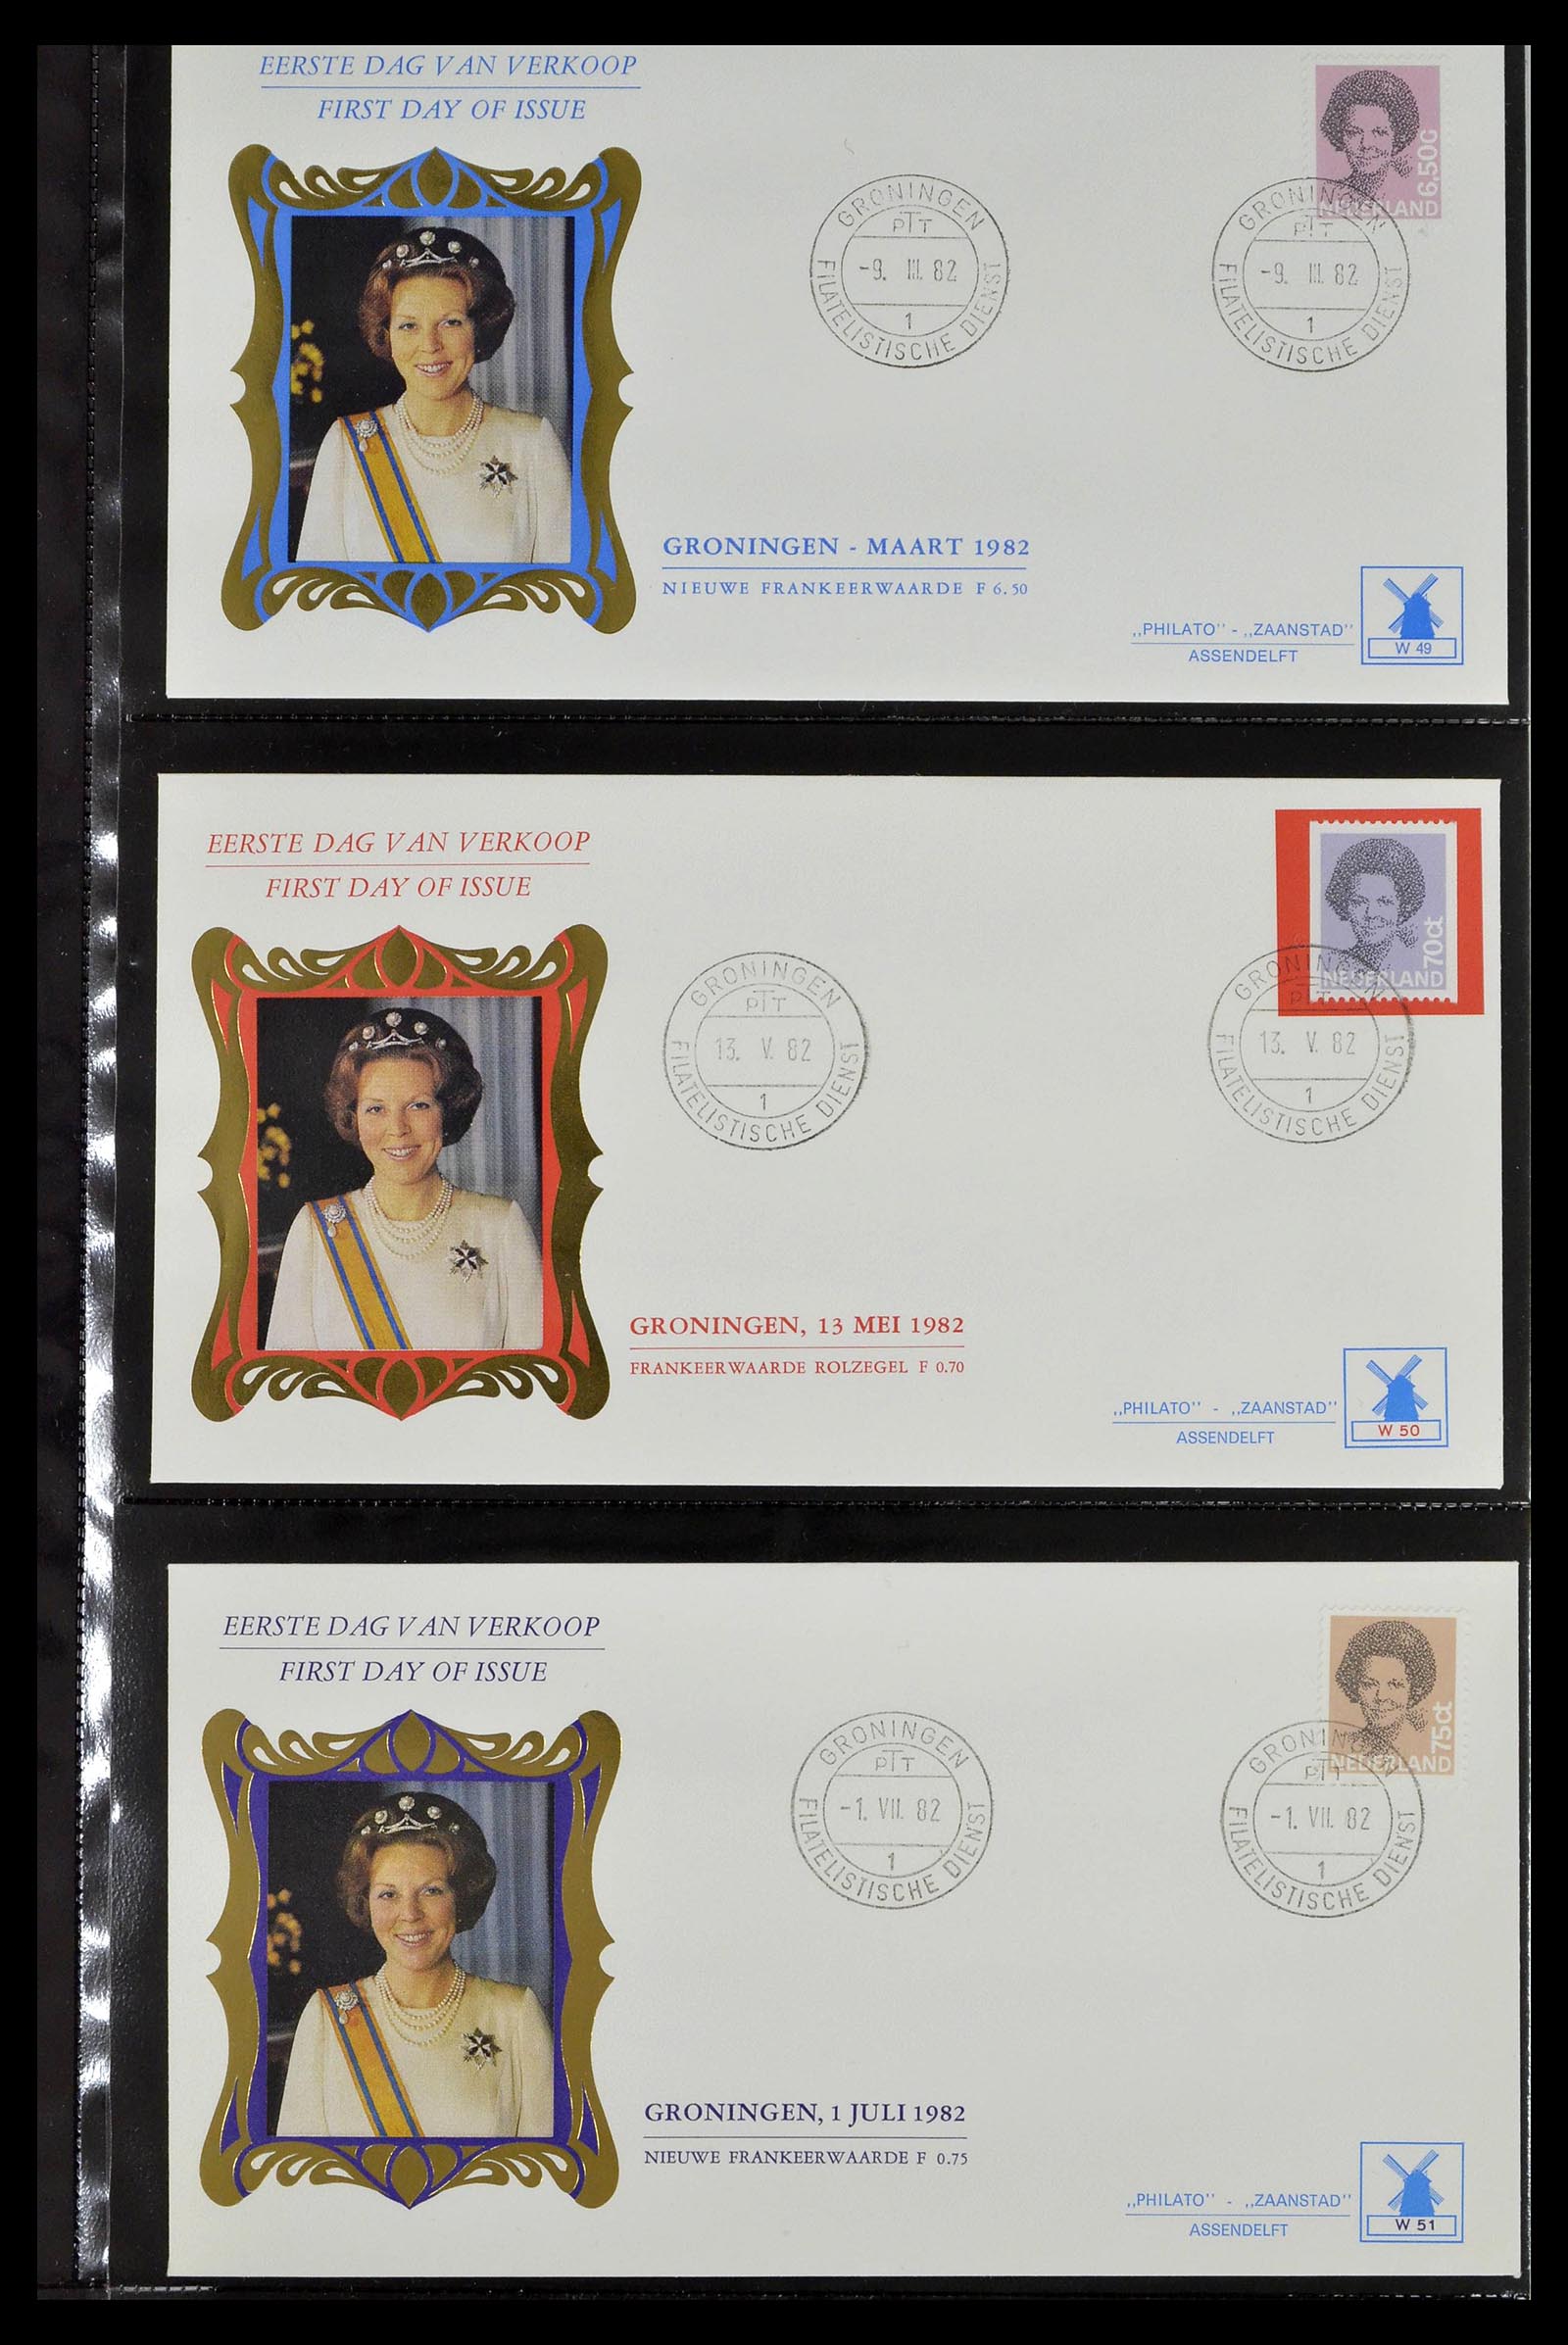 38559 0511 - Stamp collection 38559 Netherlands special first day covers.